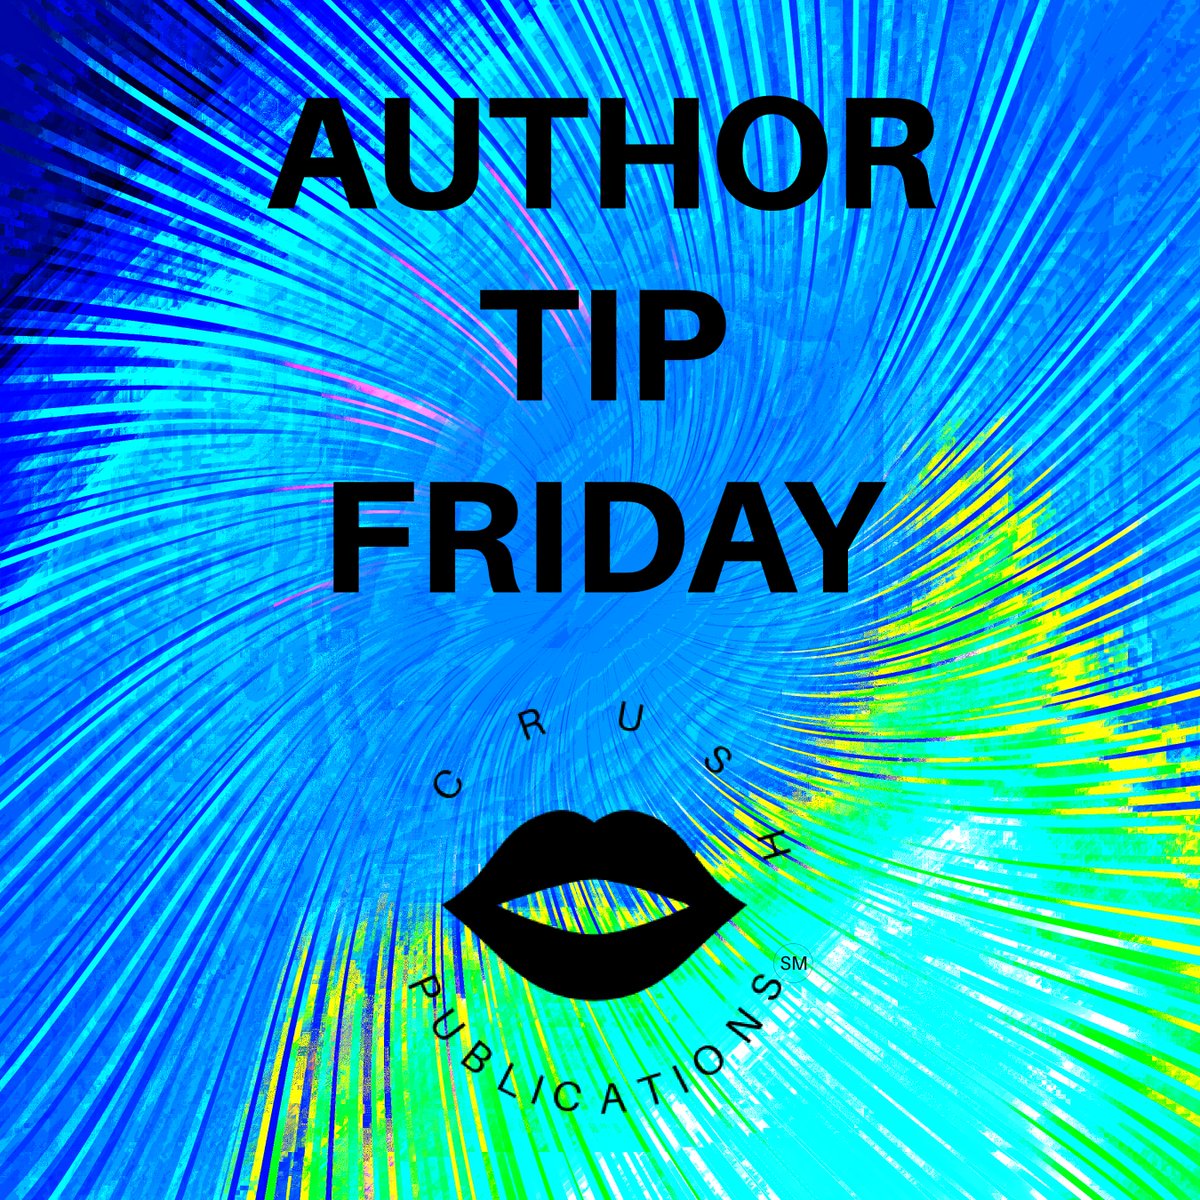 Author Tip Friday New Research says Indie authors sell 250 books in a lifetime of the title. Traditional Published authors sell 3,000 books in the lifetime of the title #AuthorTipFriday